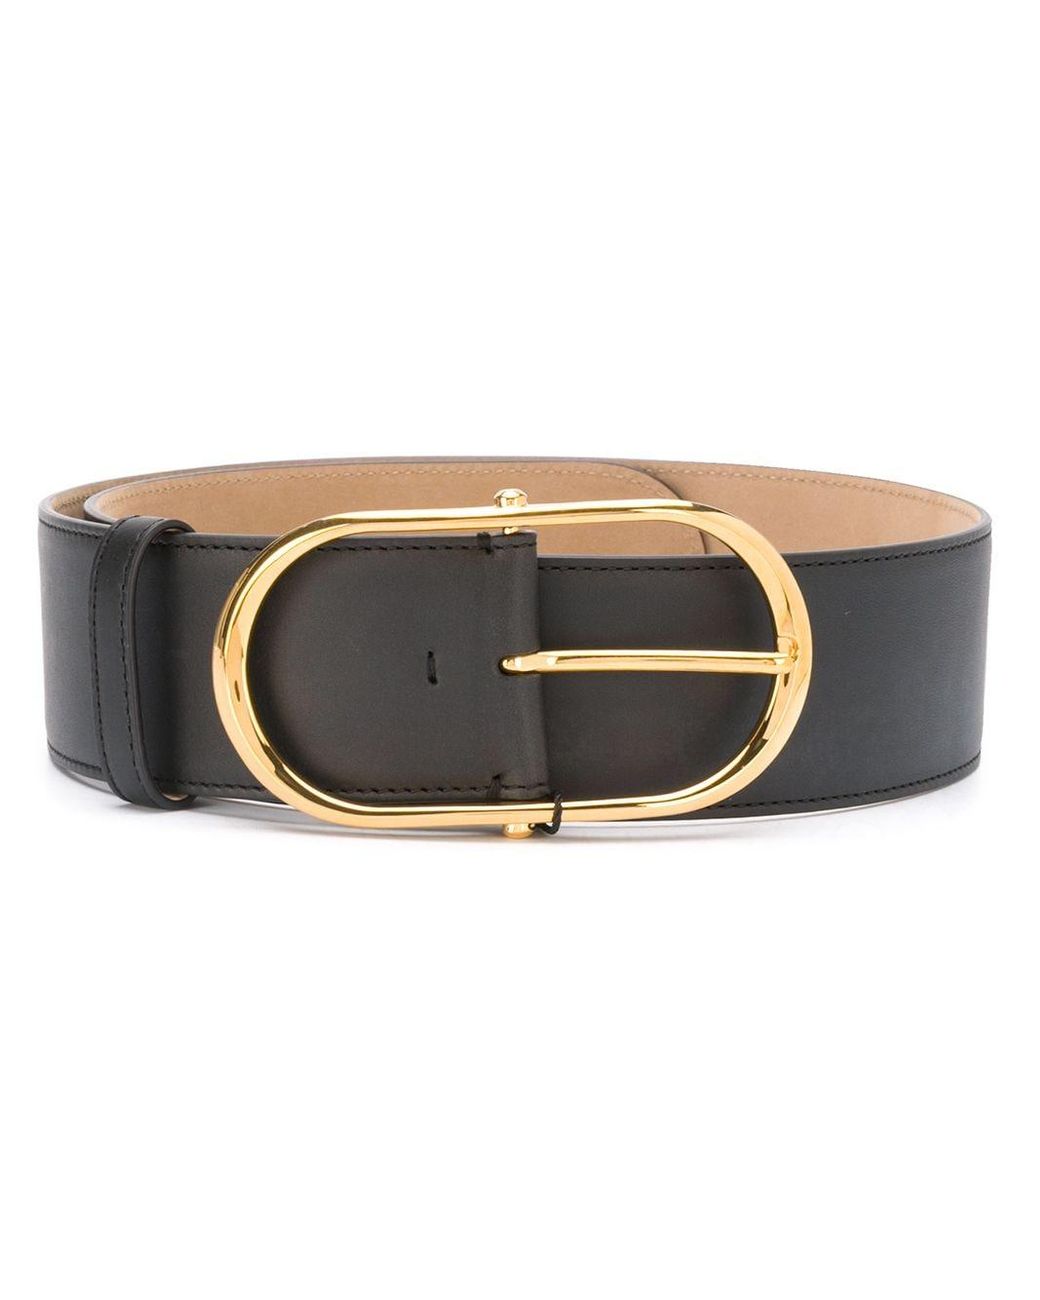 Dolce & Gabbana Leather Oval Buckle Belt in Black - Save 28% - Lyst